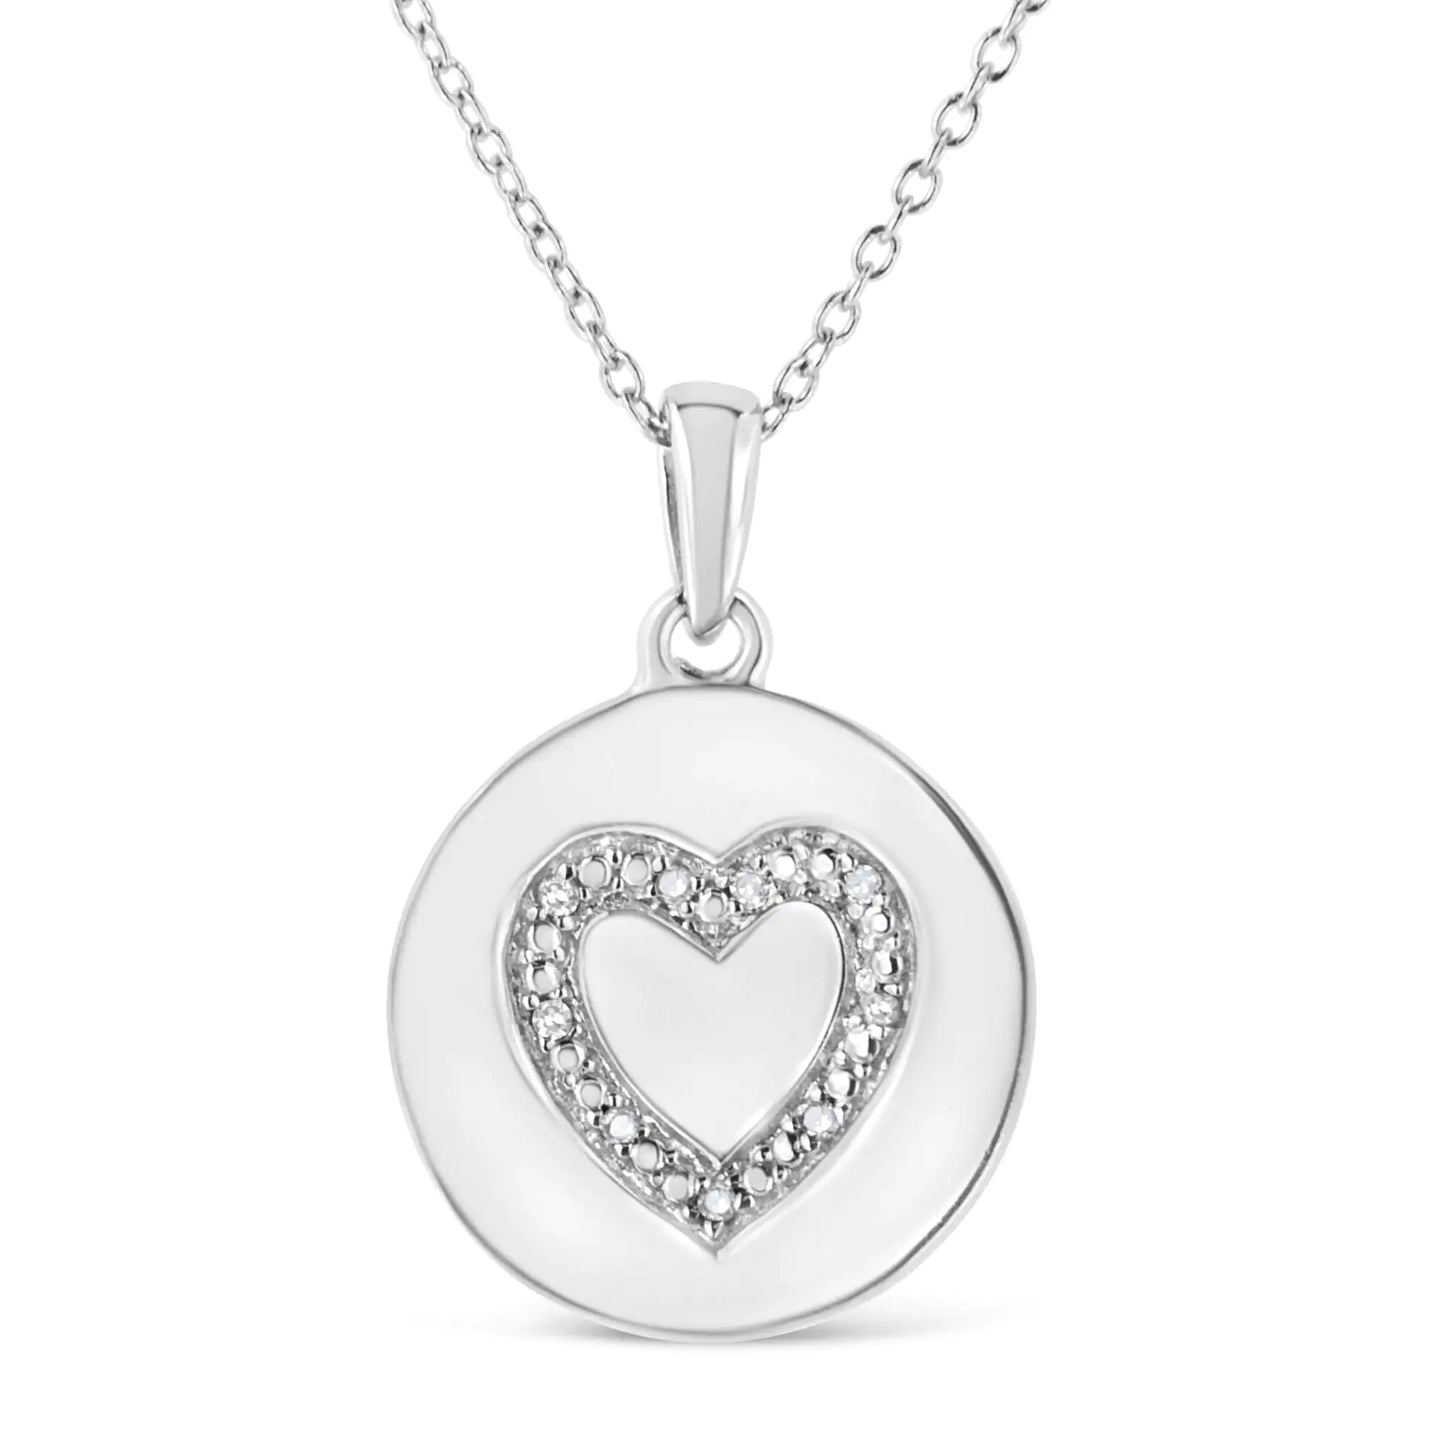 .925 Sterling Silver Prong-Set Diamond Accent Heart Emblemed 18" Pendant Necklace (I-J Color, I1-I2 Clarity)